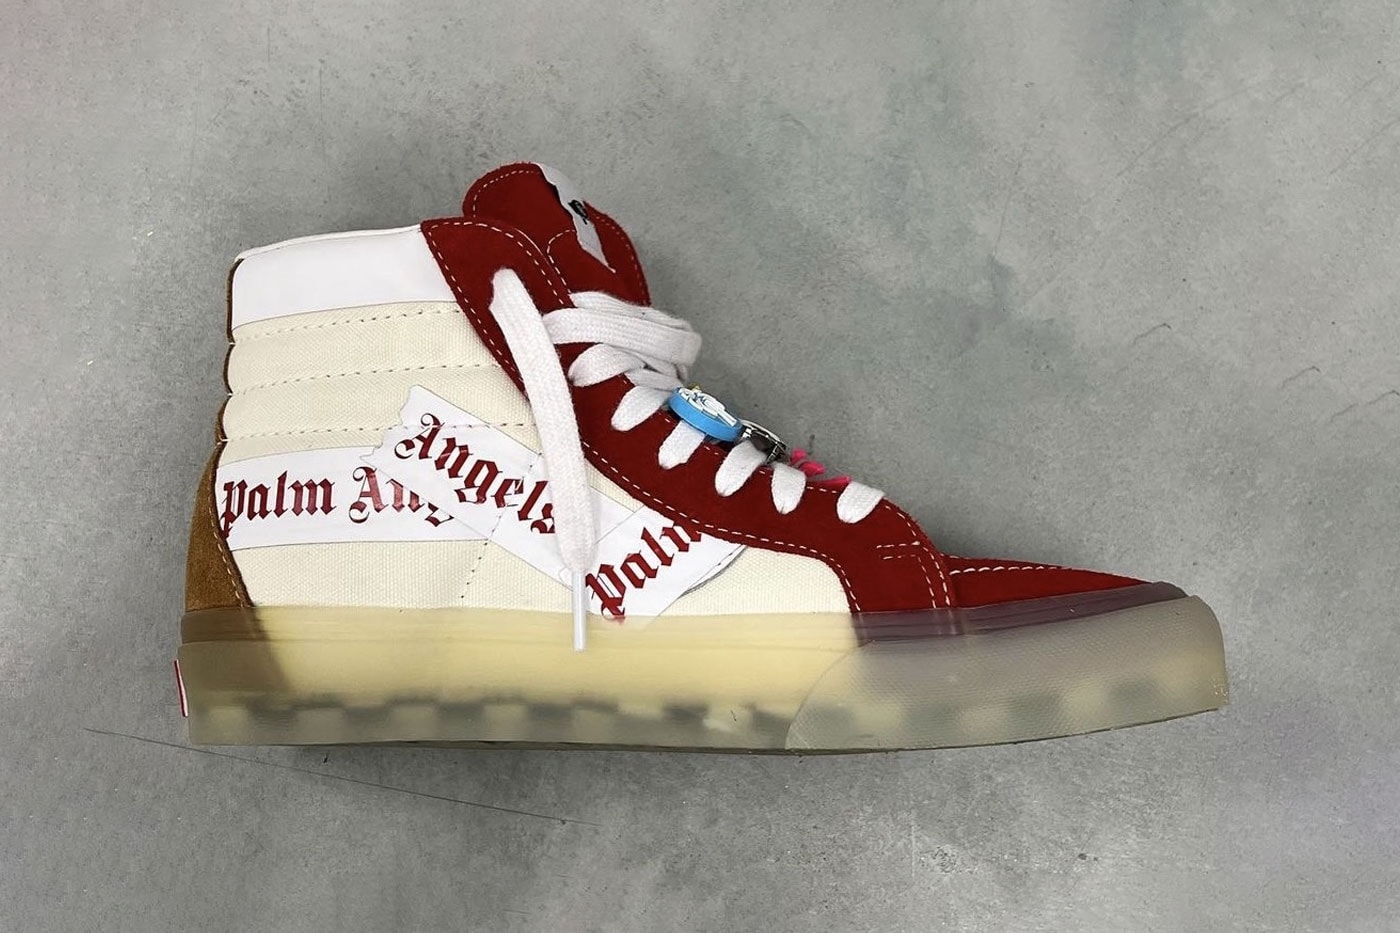 Palm Angels Vans Sk8 Hi palm trees red sail white nubuck leather translucent midsole checkerboard FW22 first look images release info